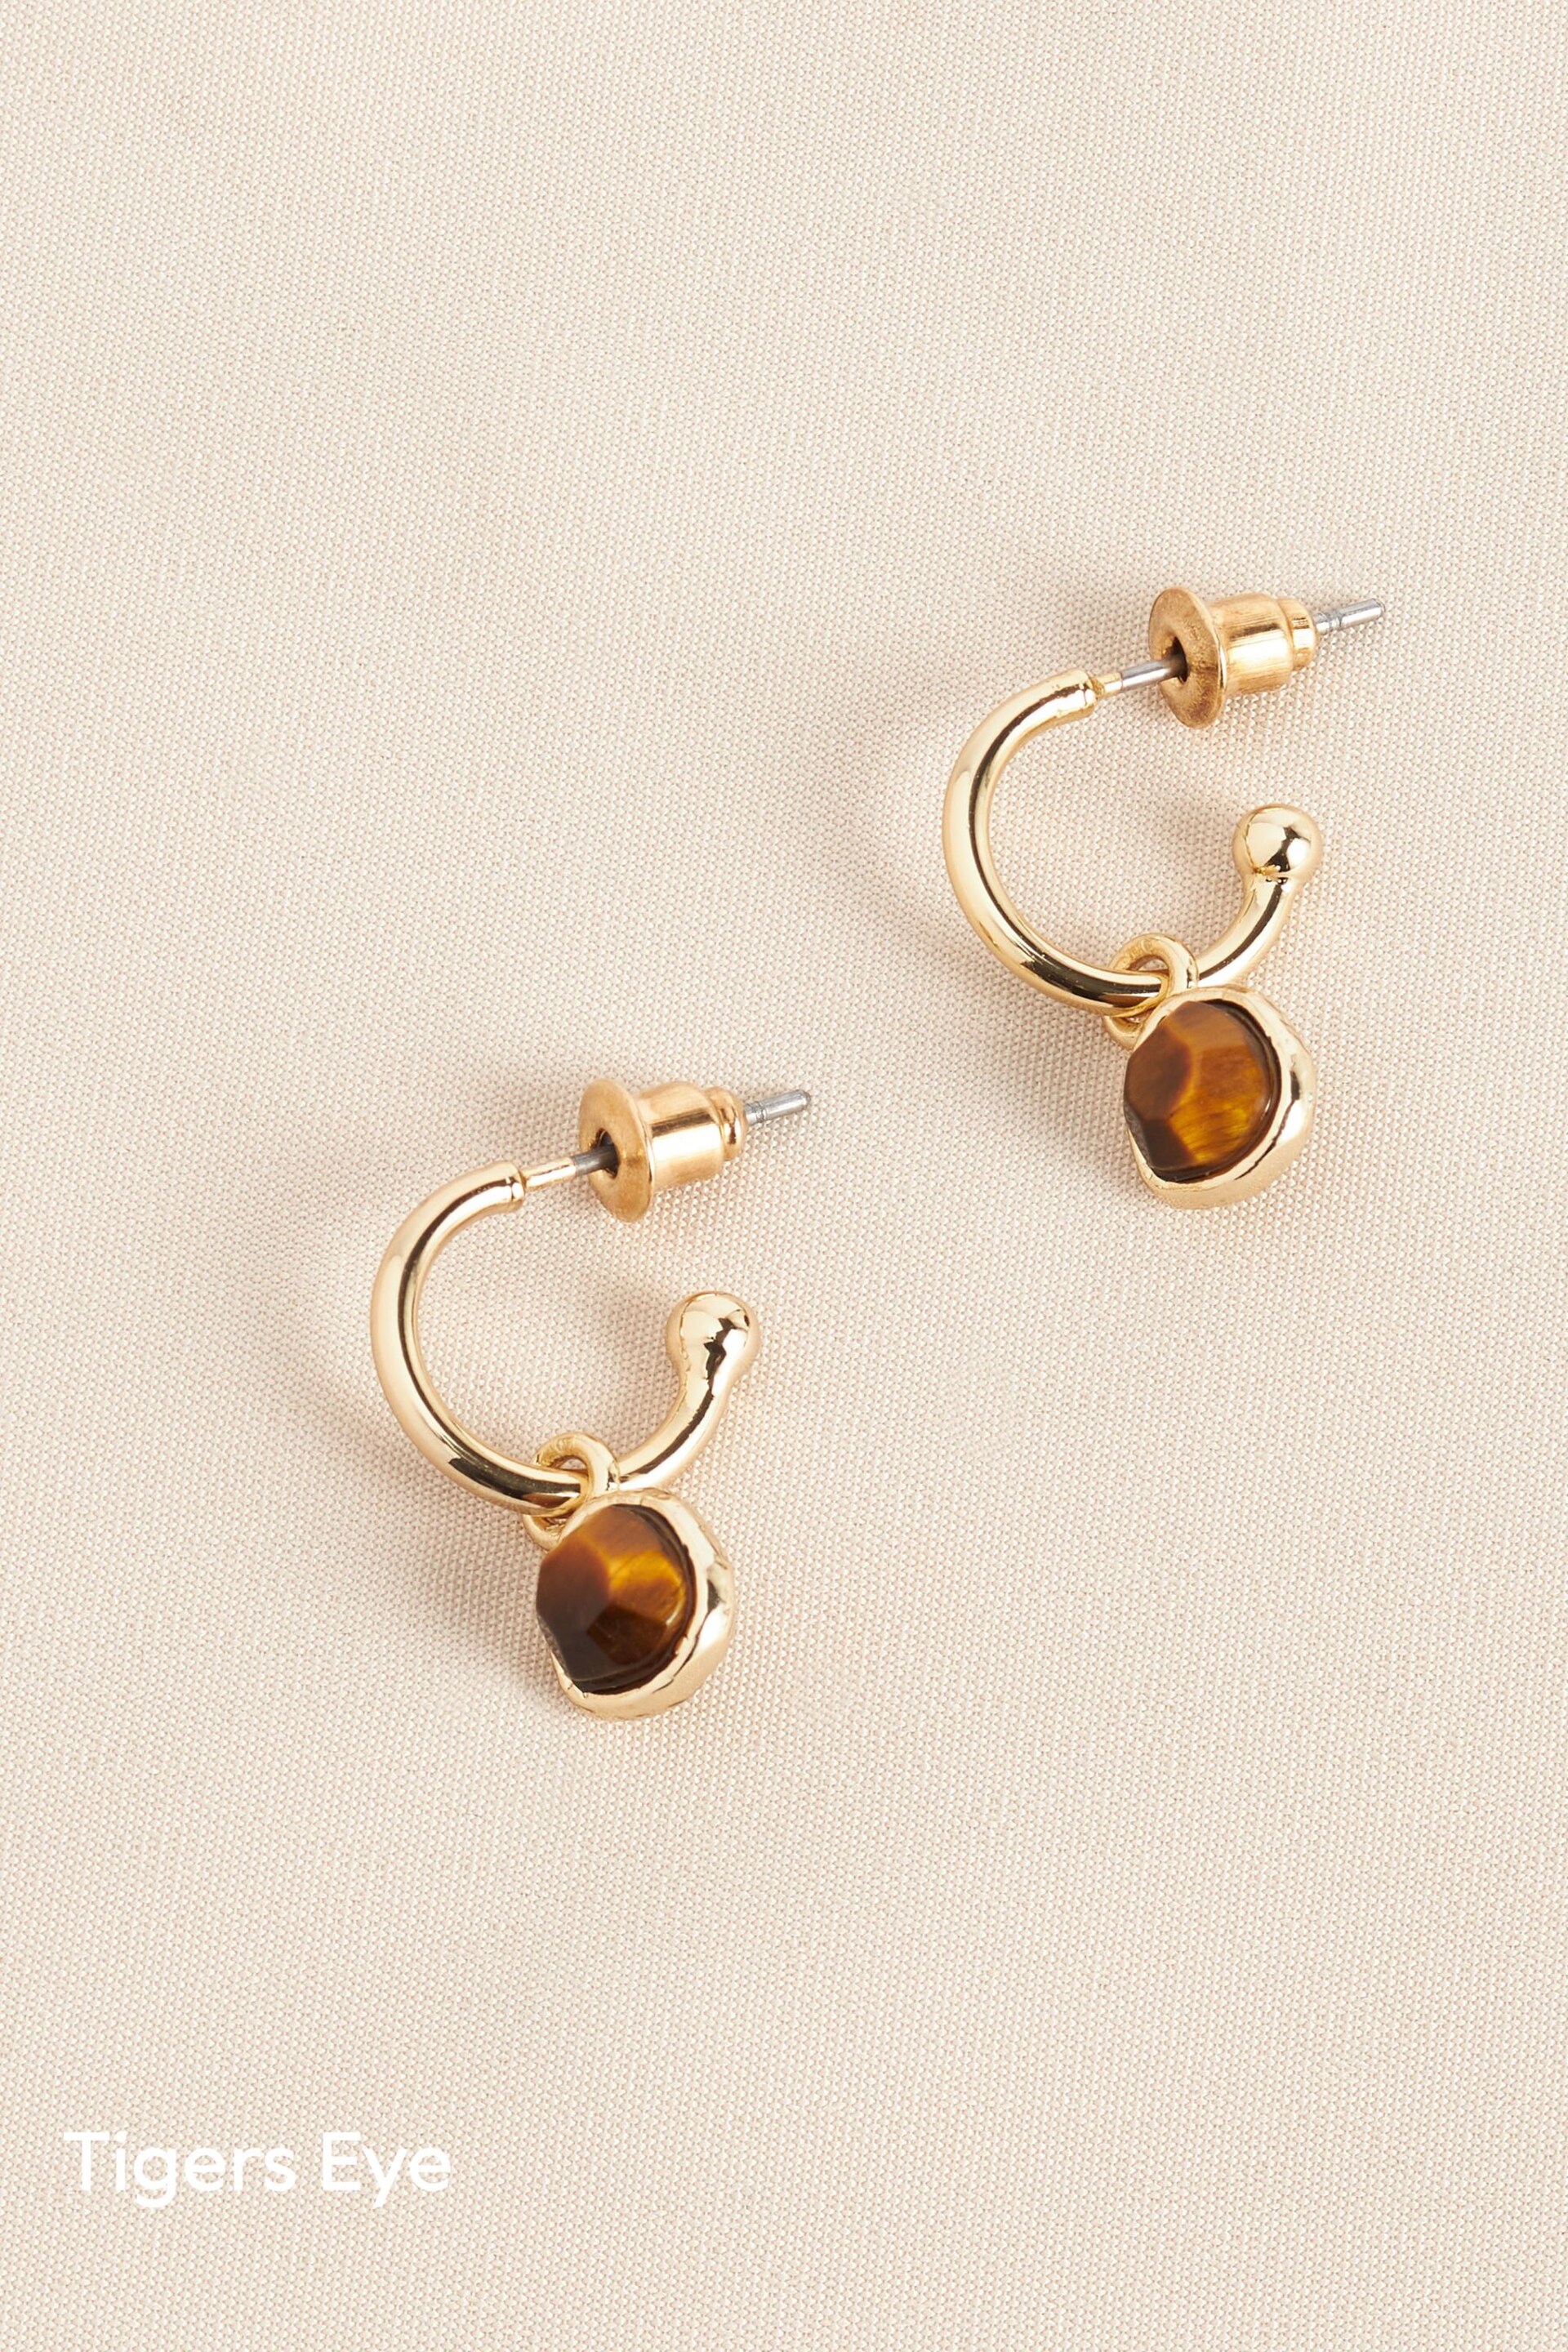 Gold/Silver Plated Sterling Silver Semi Precious Stone Hoop Earrings - Image 7 of 9